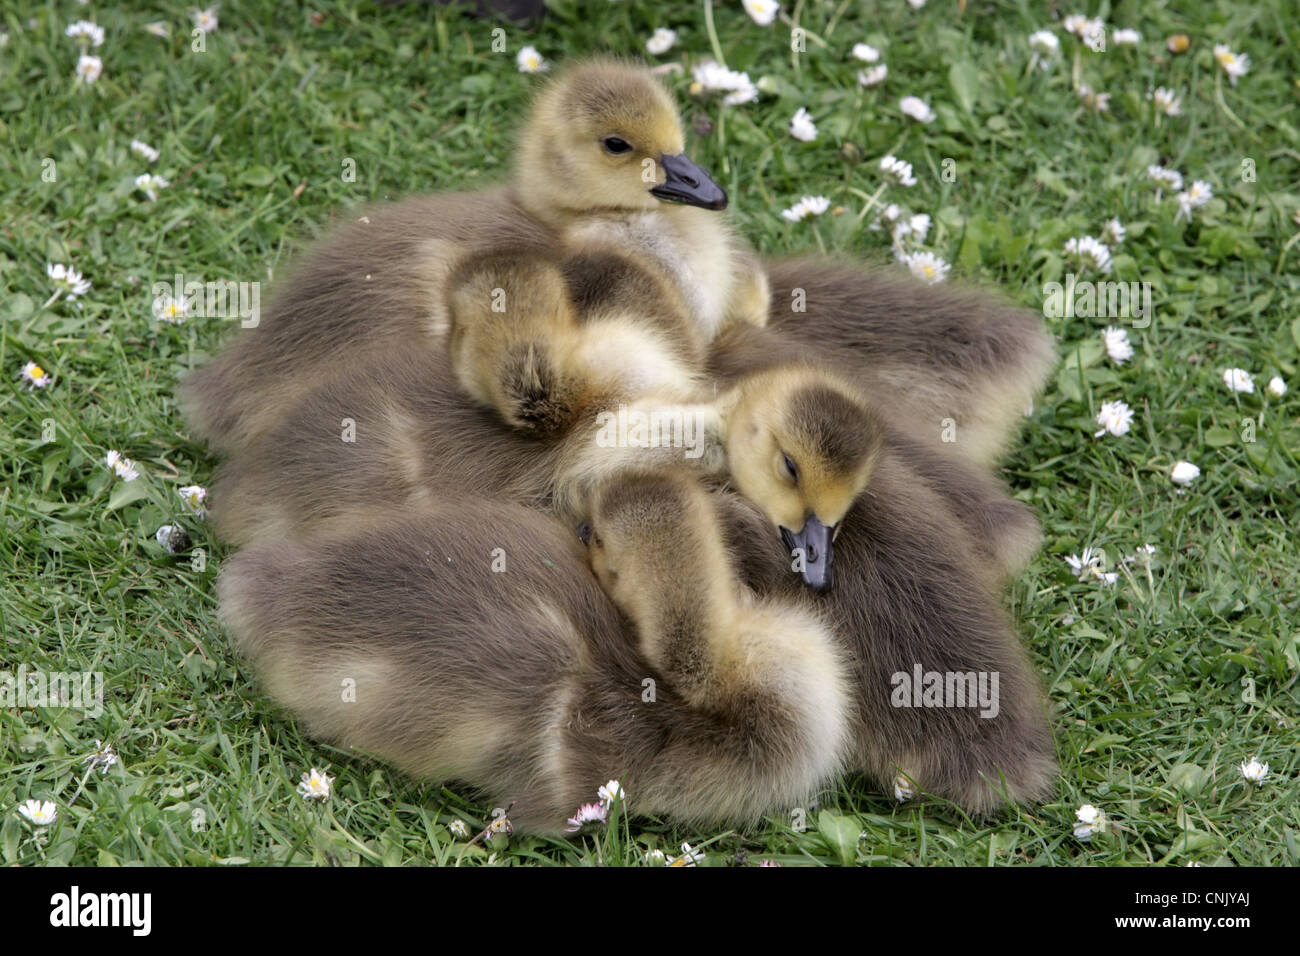 Canada Goose (Branta canadensis) introduced species, goslings, sleeping huddled together, London, England, may Stock Photo